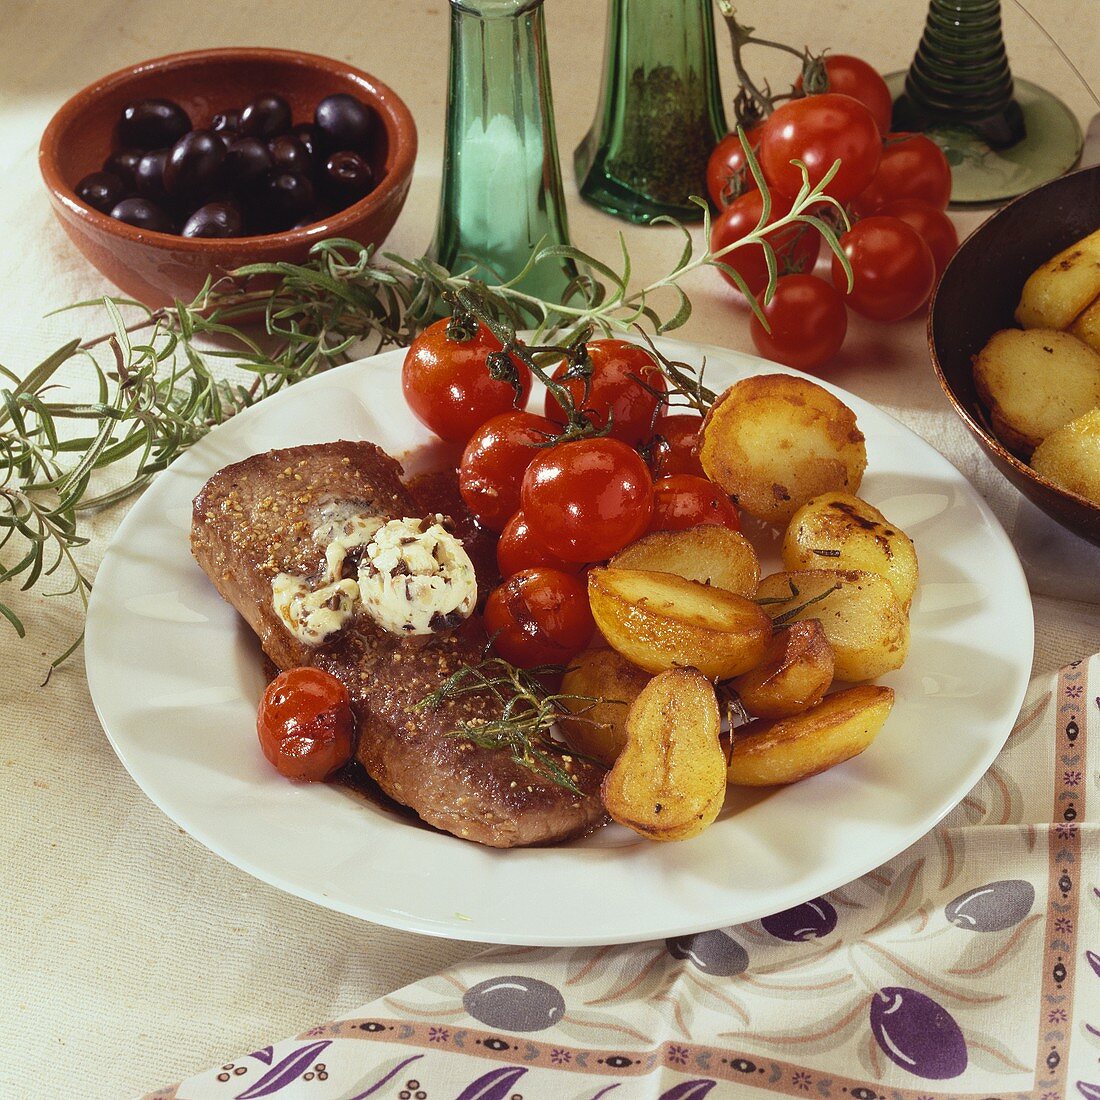 Lamb steak with olive butter, roast potatoes & cherry tomatoes